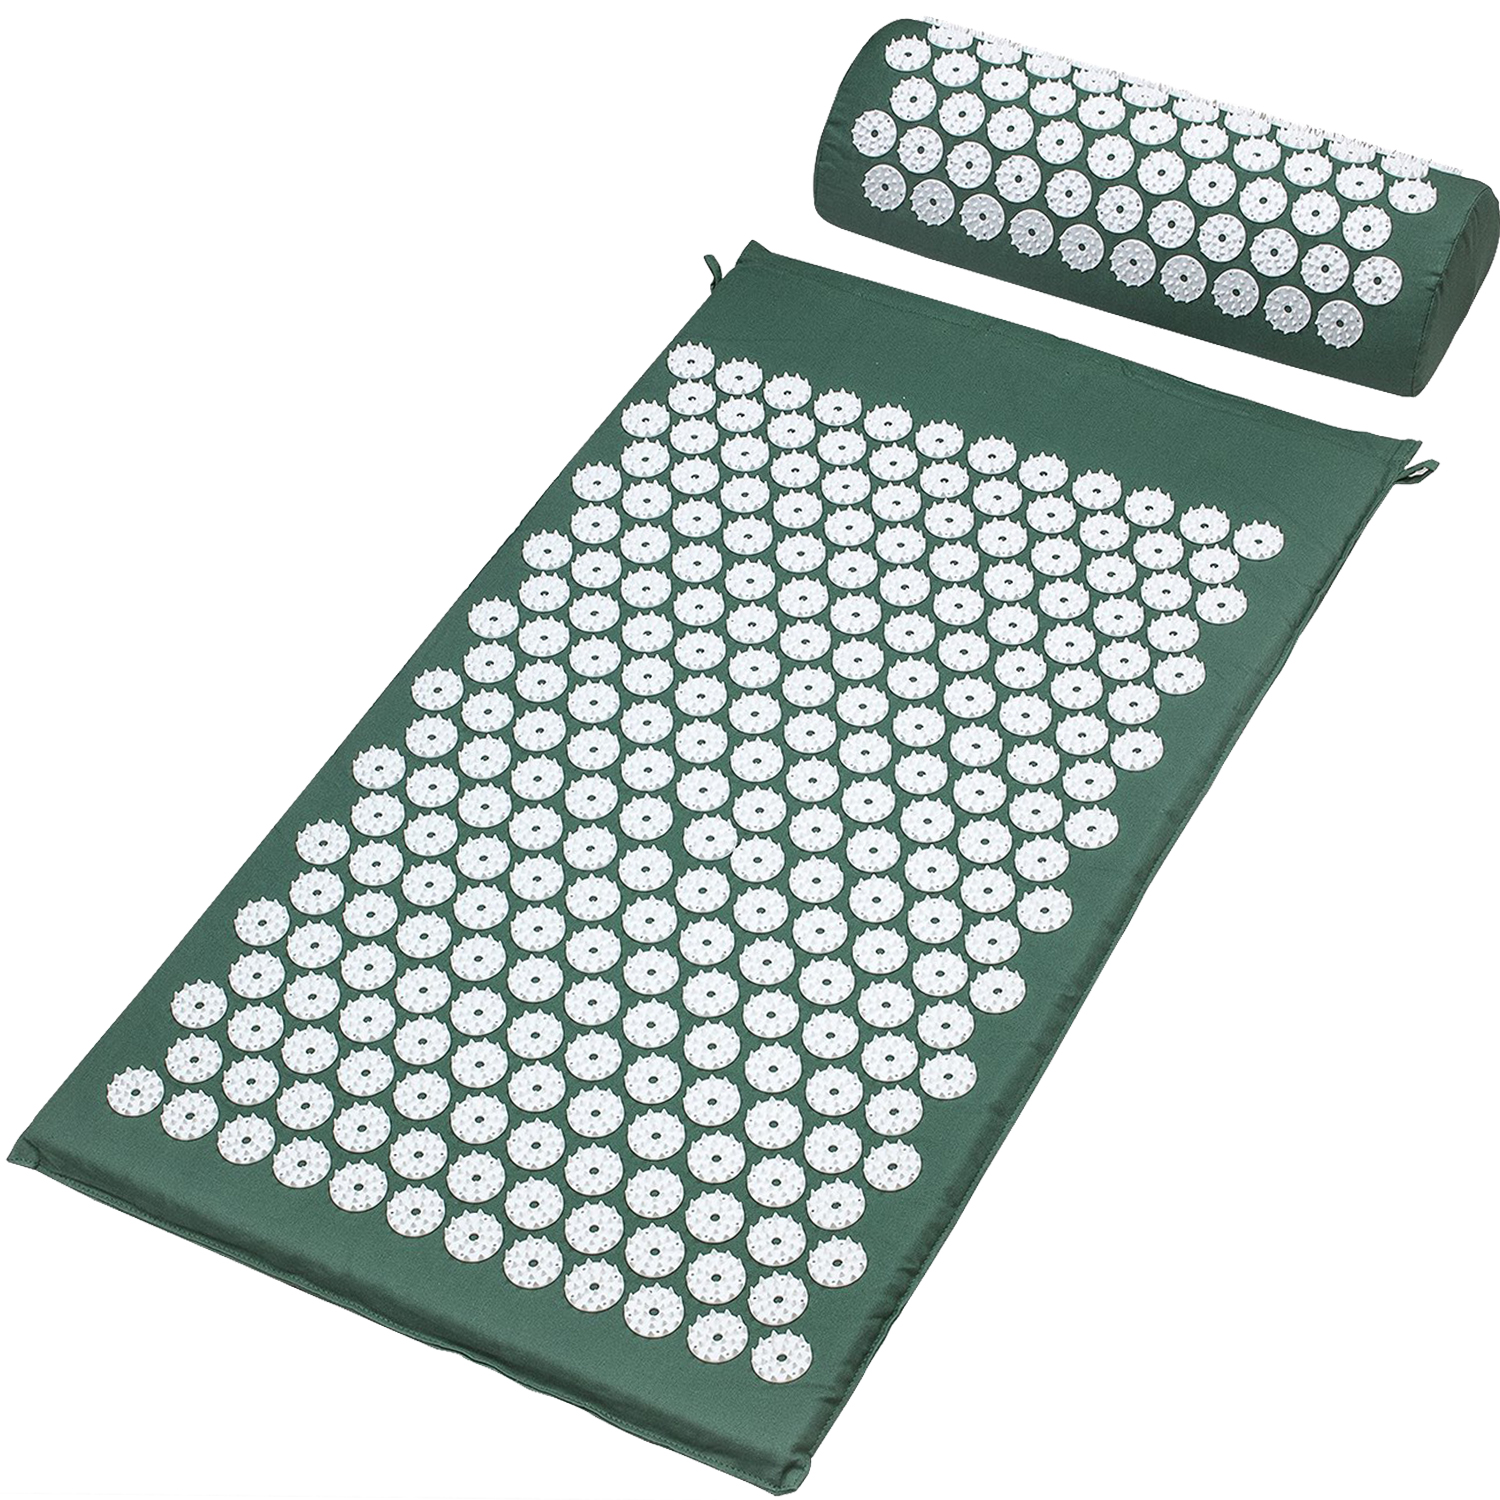 New Arrival China Yoga Cork Block -
 Foot Back and Neck Pain Relief Acupressure Mat and Pillow Set Foot Muscle Acupressure Massage Mat Comes in a Carry bag/ box – Rise Group